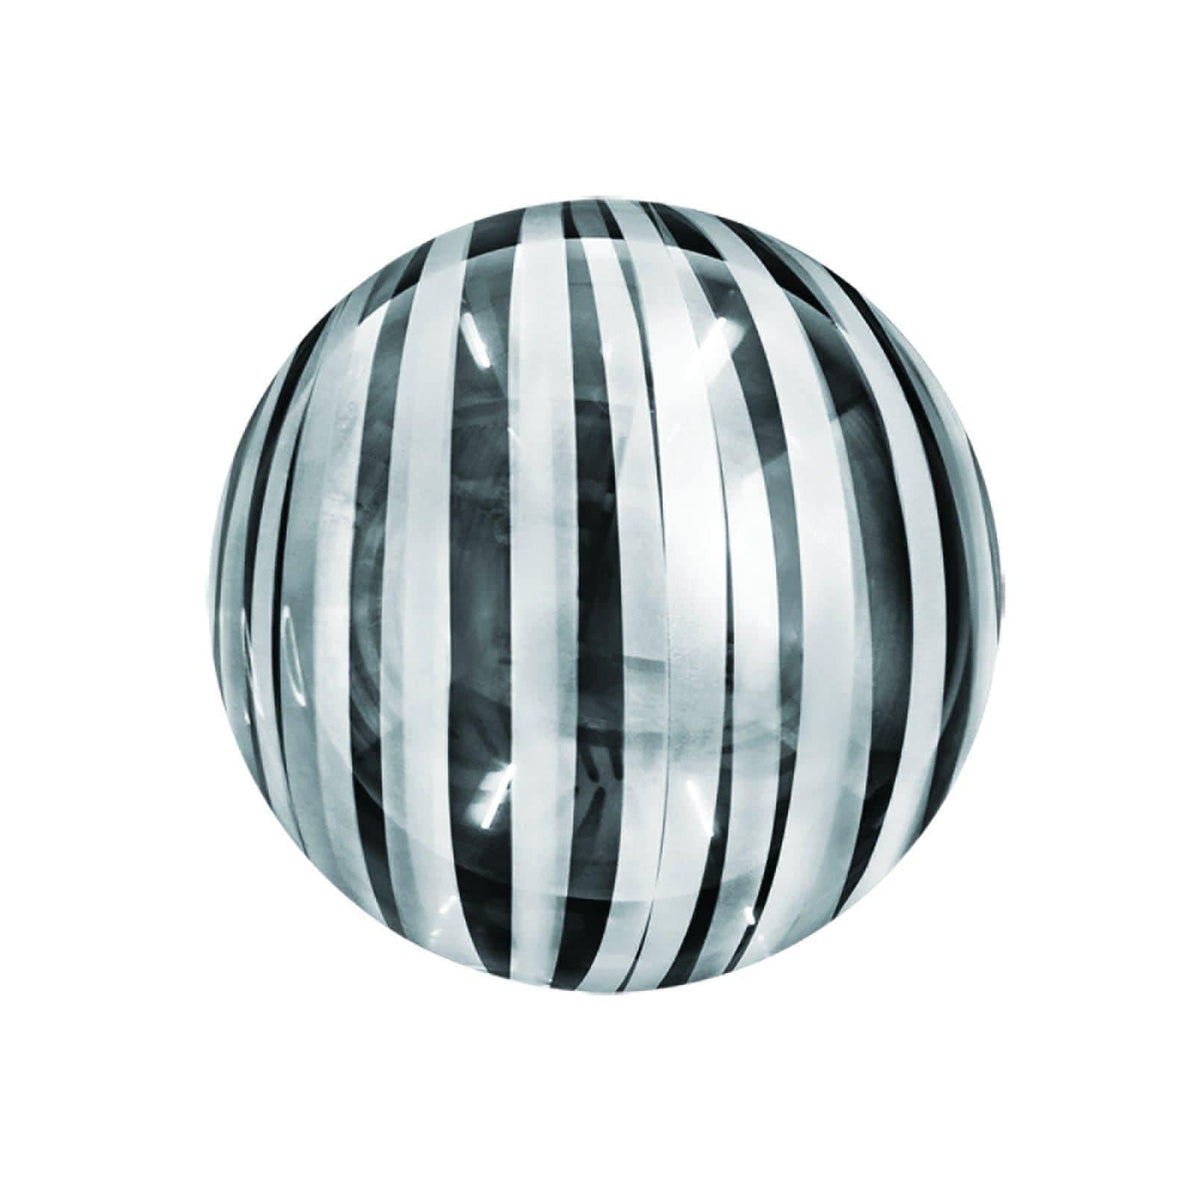 Buy Balloons Stripe Bubble Balloon, Silver, 18 Inches sold at Party Expert